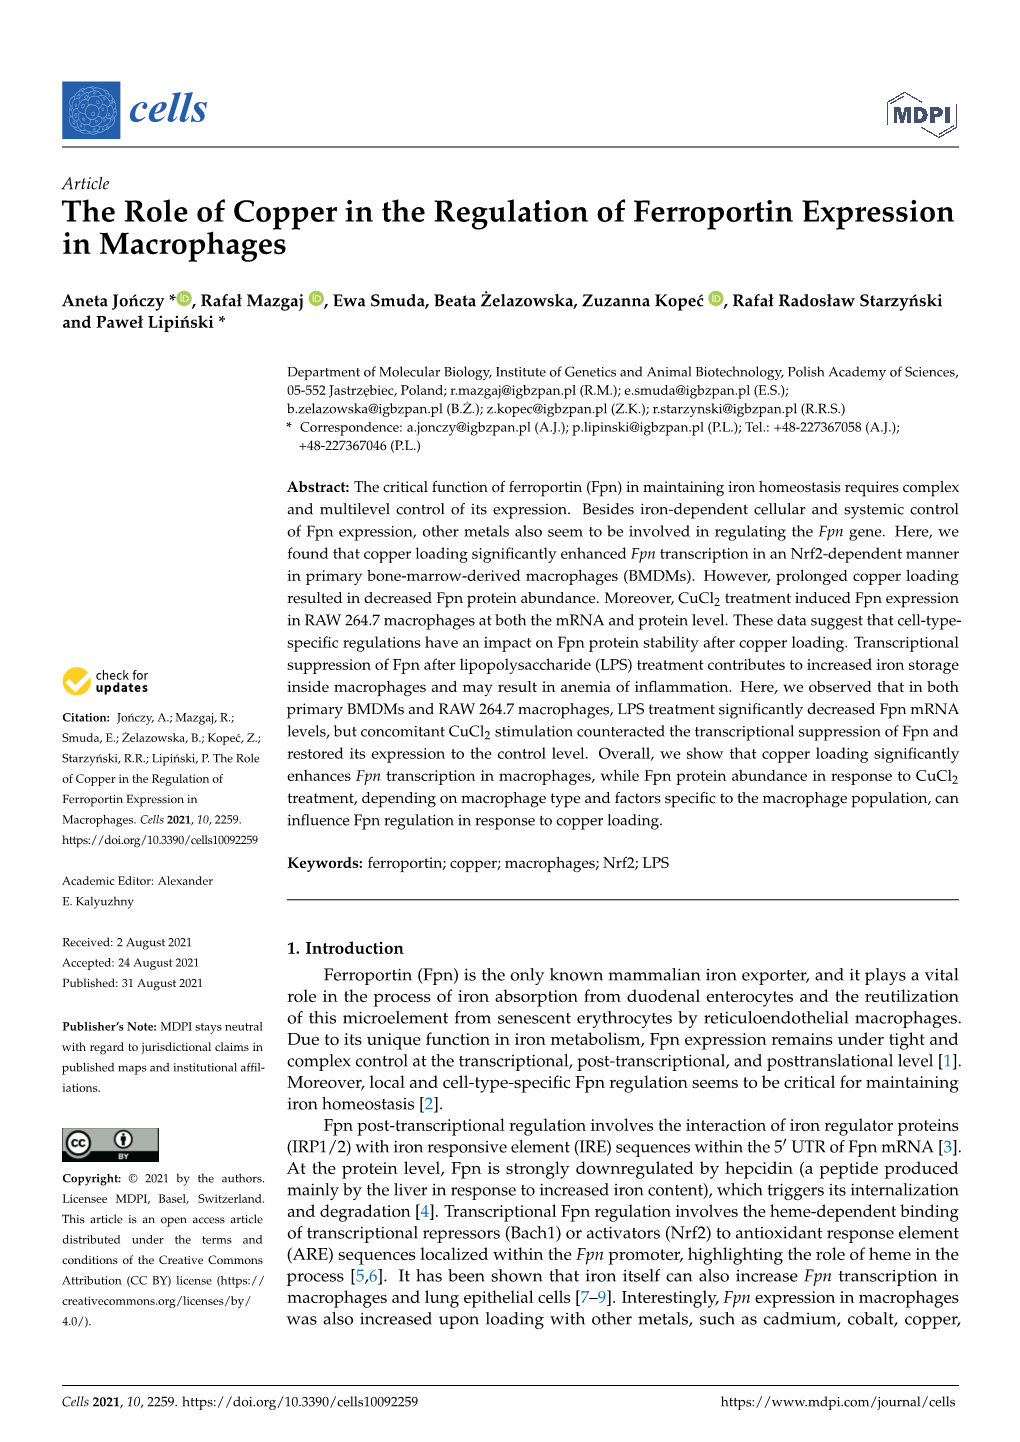 The Role of Copper in the Regulation of Ferroportin Expression in Macrophages